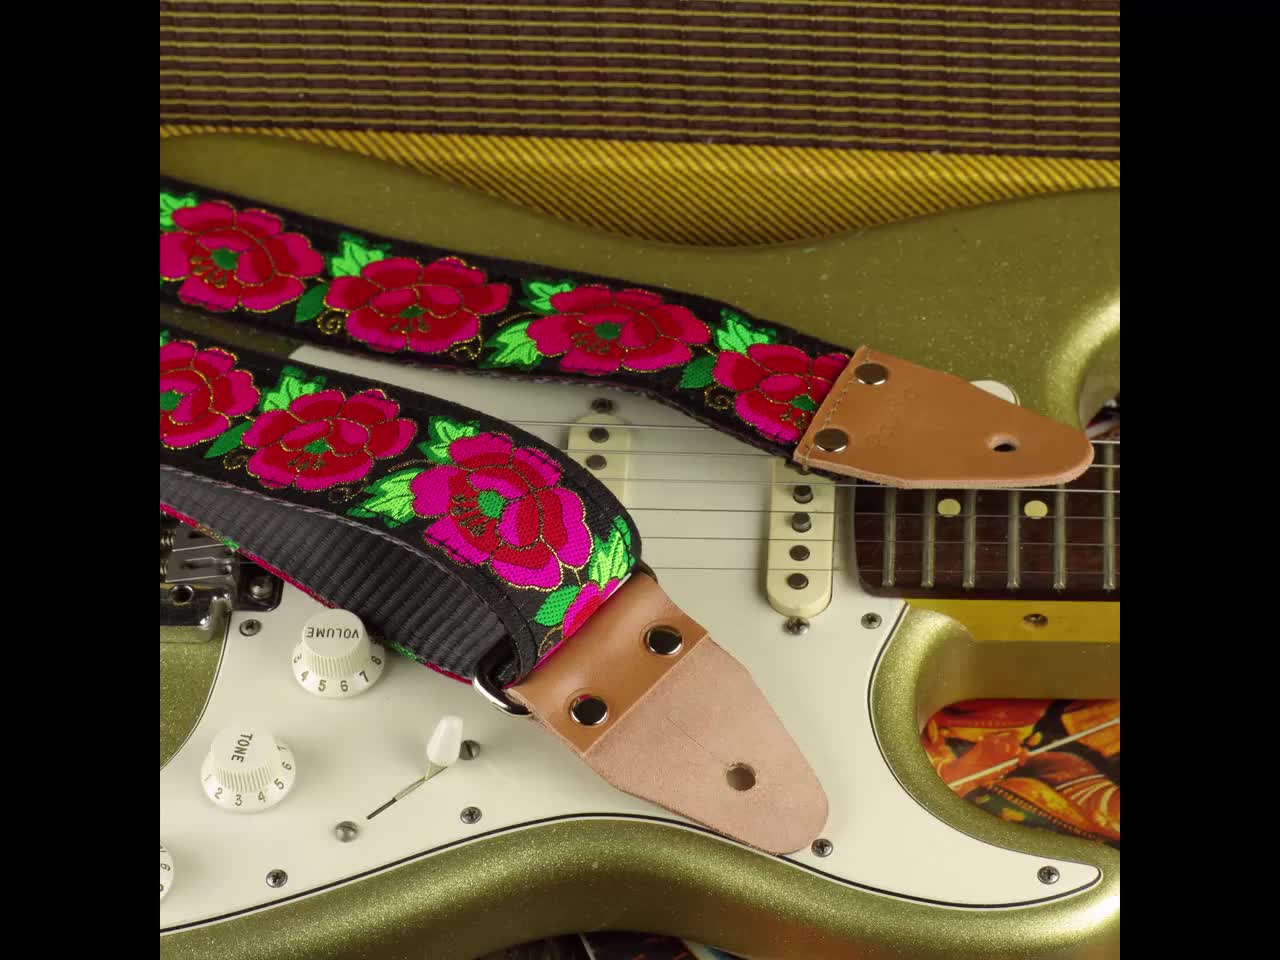 Green purse guitar strap with flowers based in Hippie guitar straps